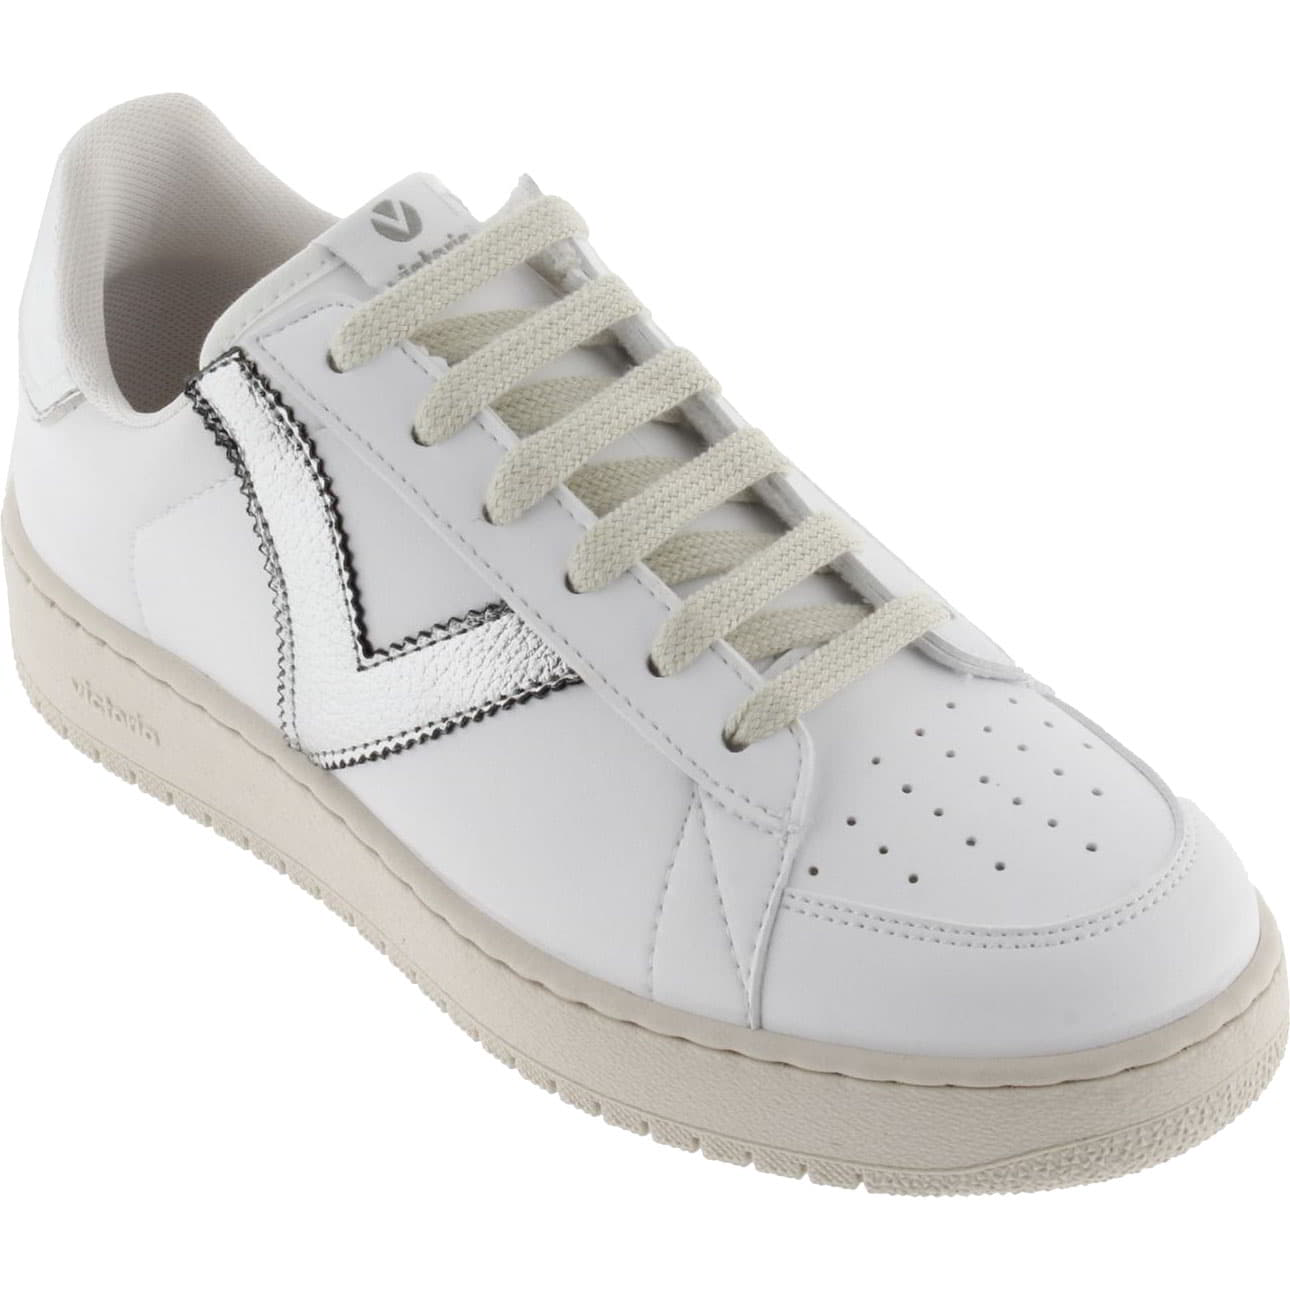 Victoria Shoes Womens Madrid Metal Trainers - Plata